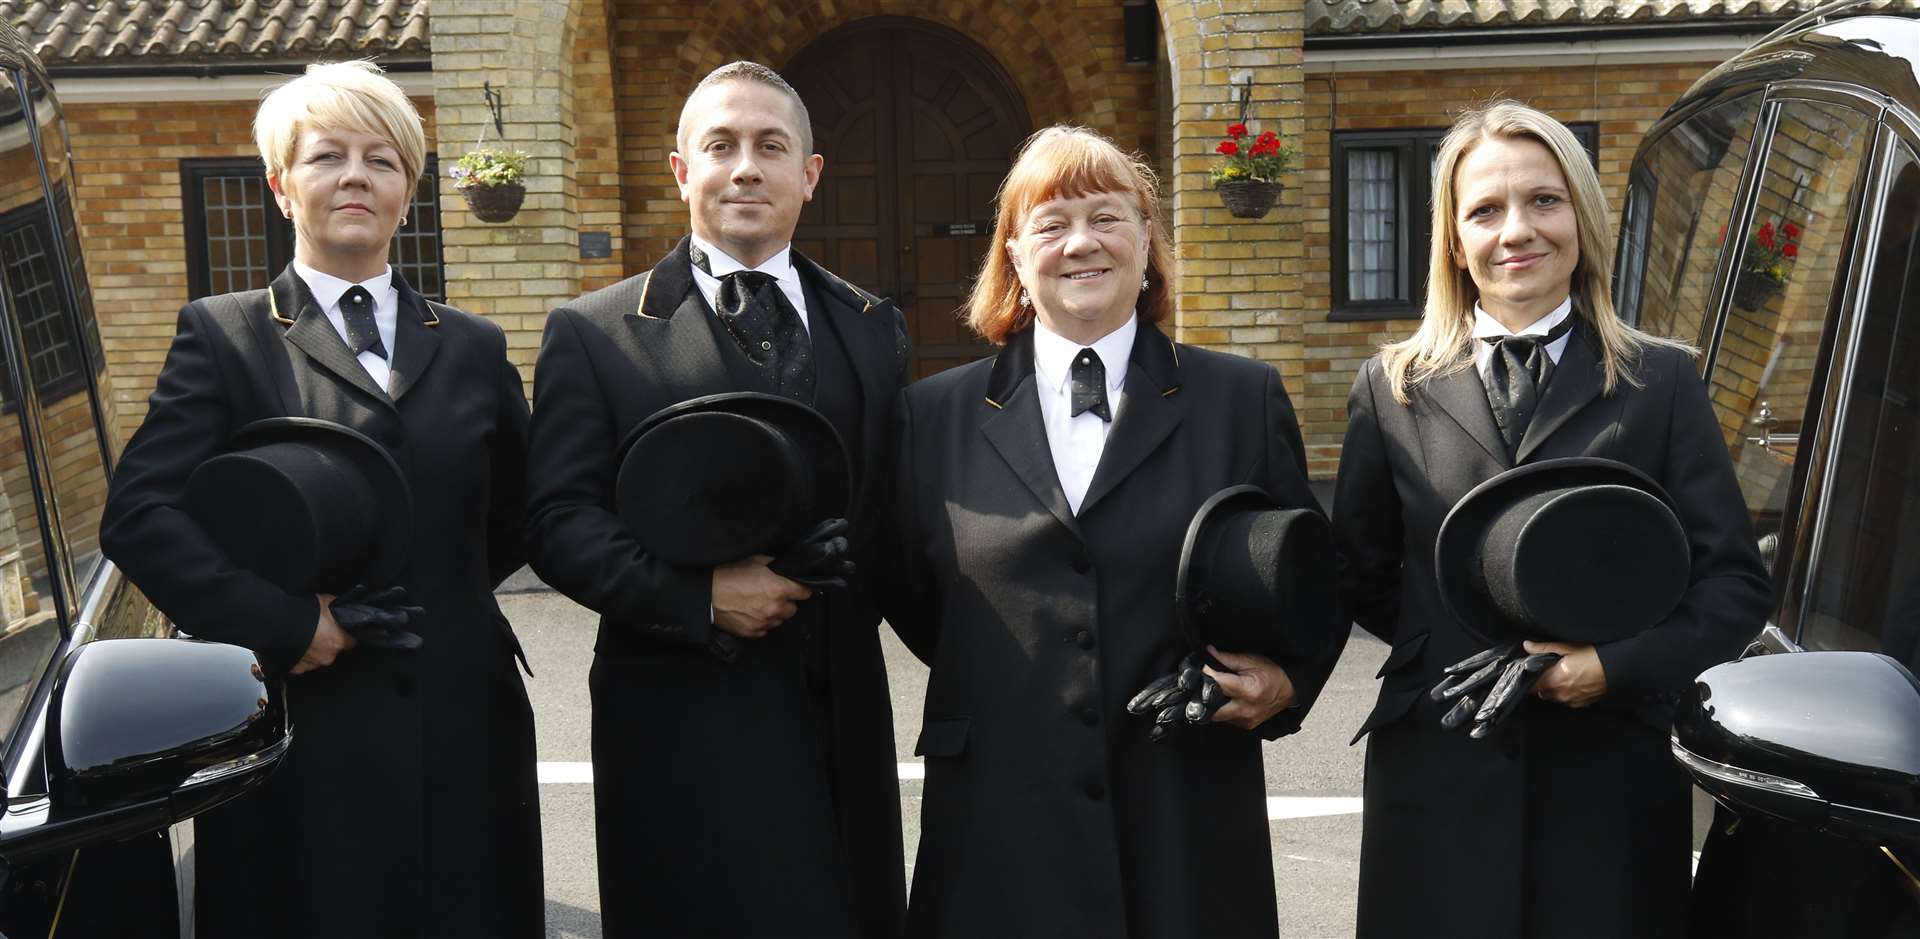 Although most of the funerals are carried out in the Dover and Folkestone areas, they also regularly conduct funerals in Ashford, Canterbury, London, and even further afield.